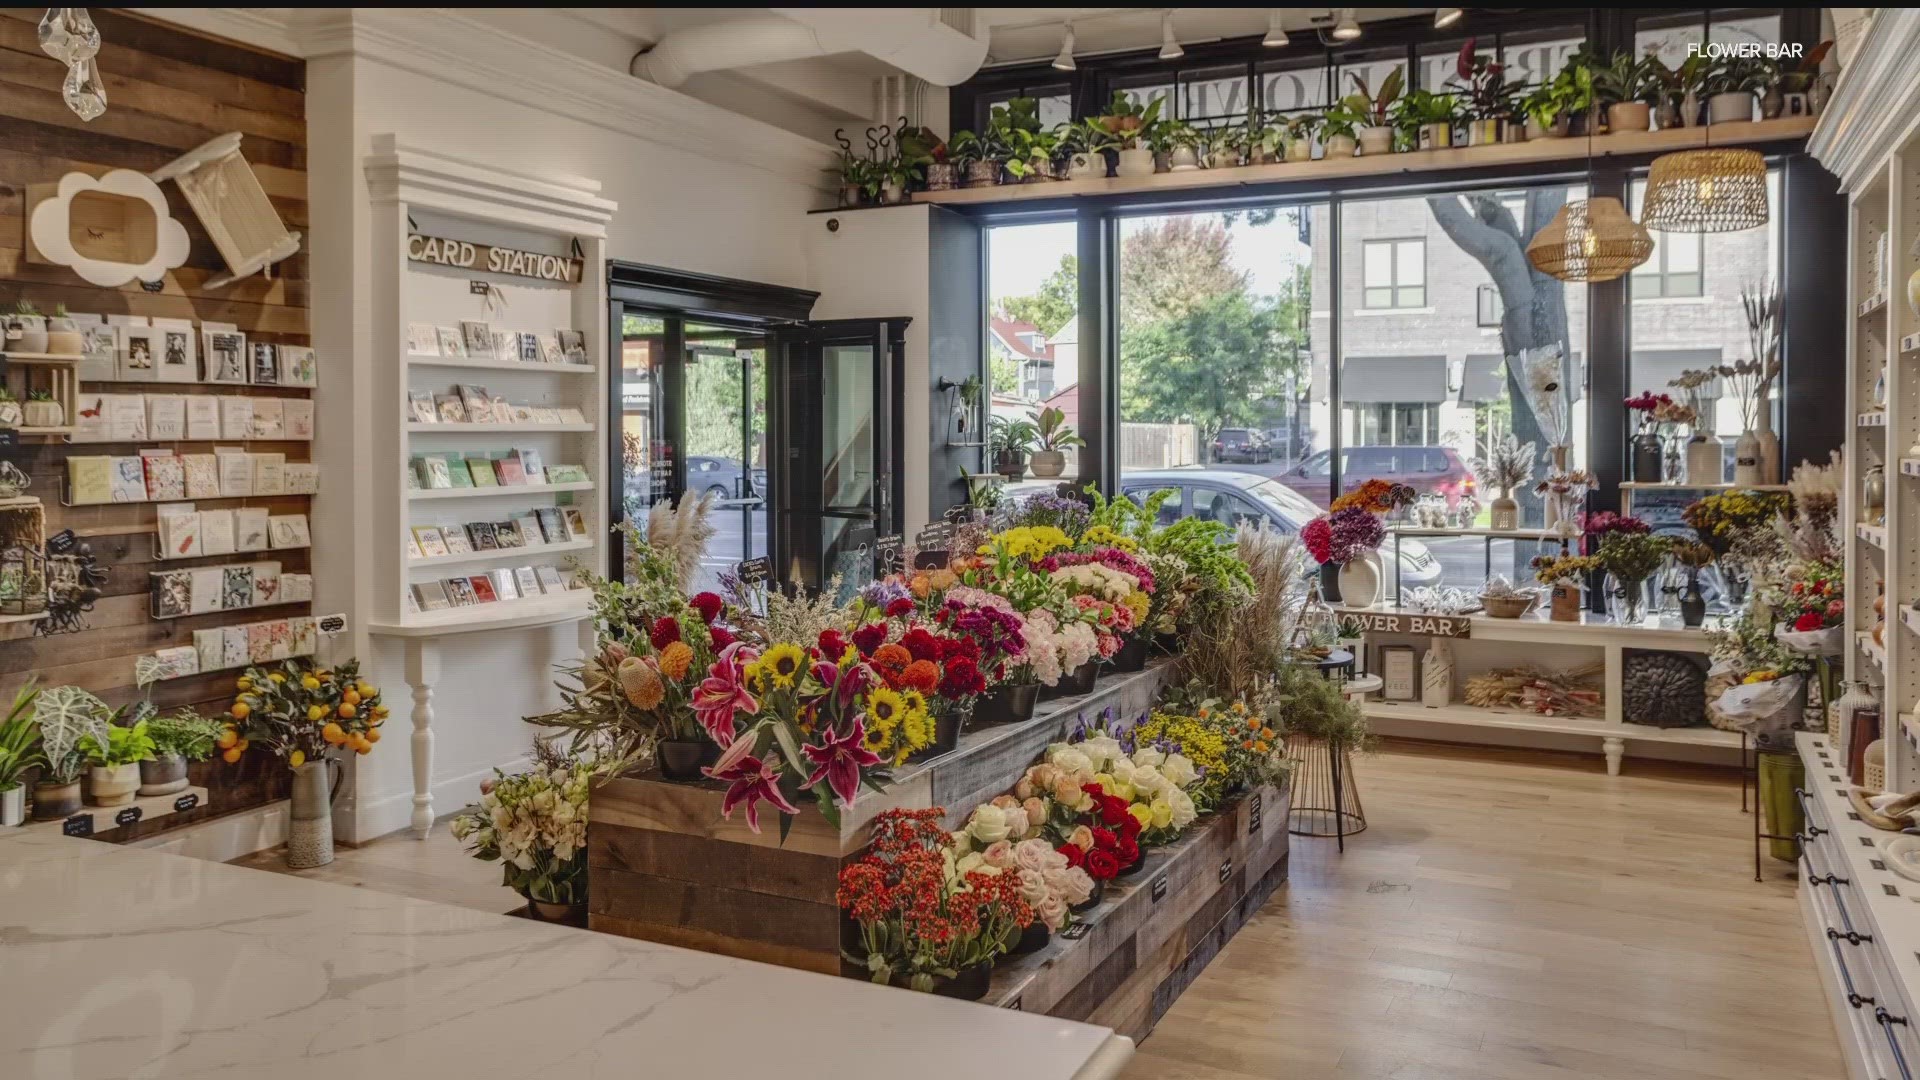 Flower Bar offers more than 40 varieties of flowers in the shop at any time and a selection of flowers that changes weekly.